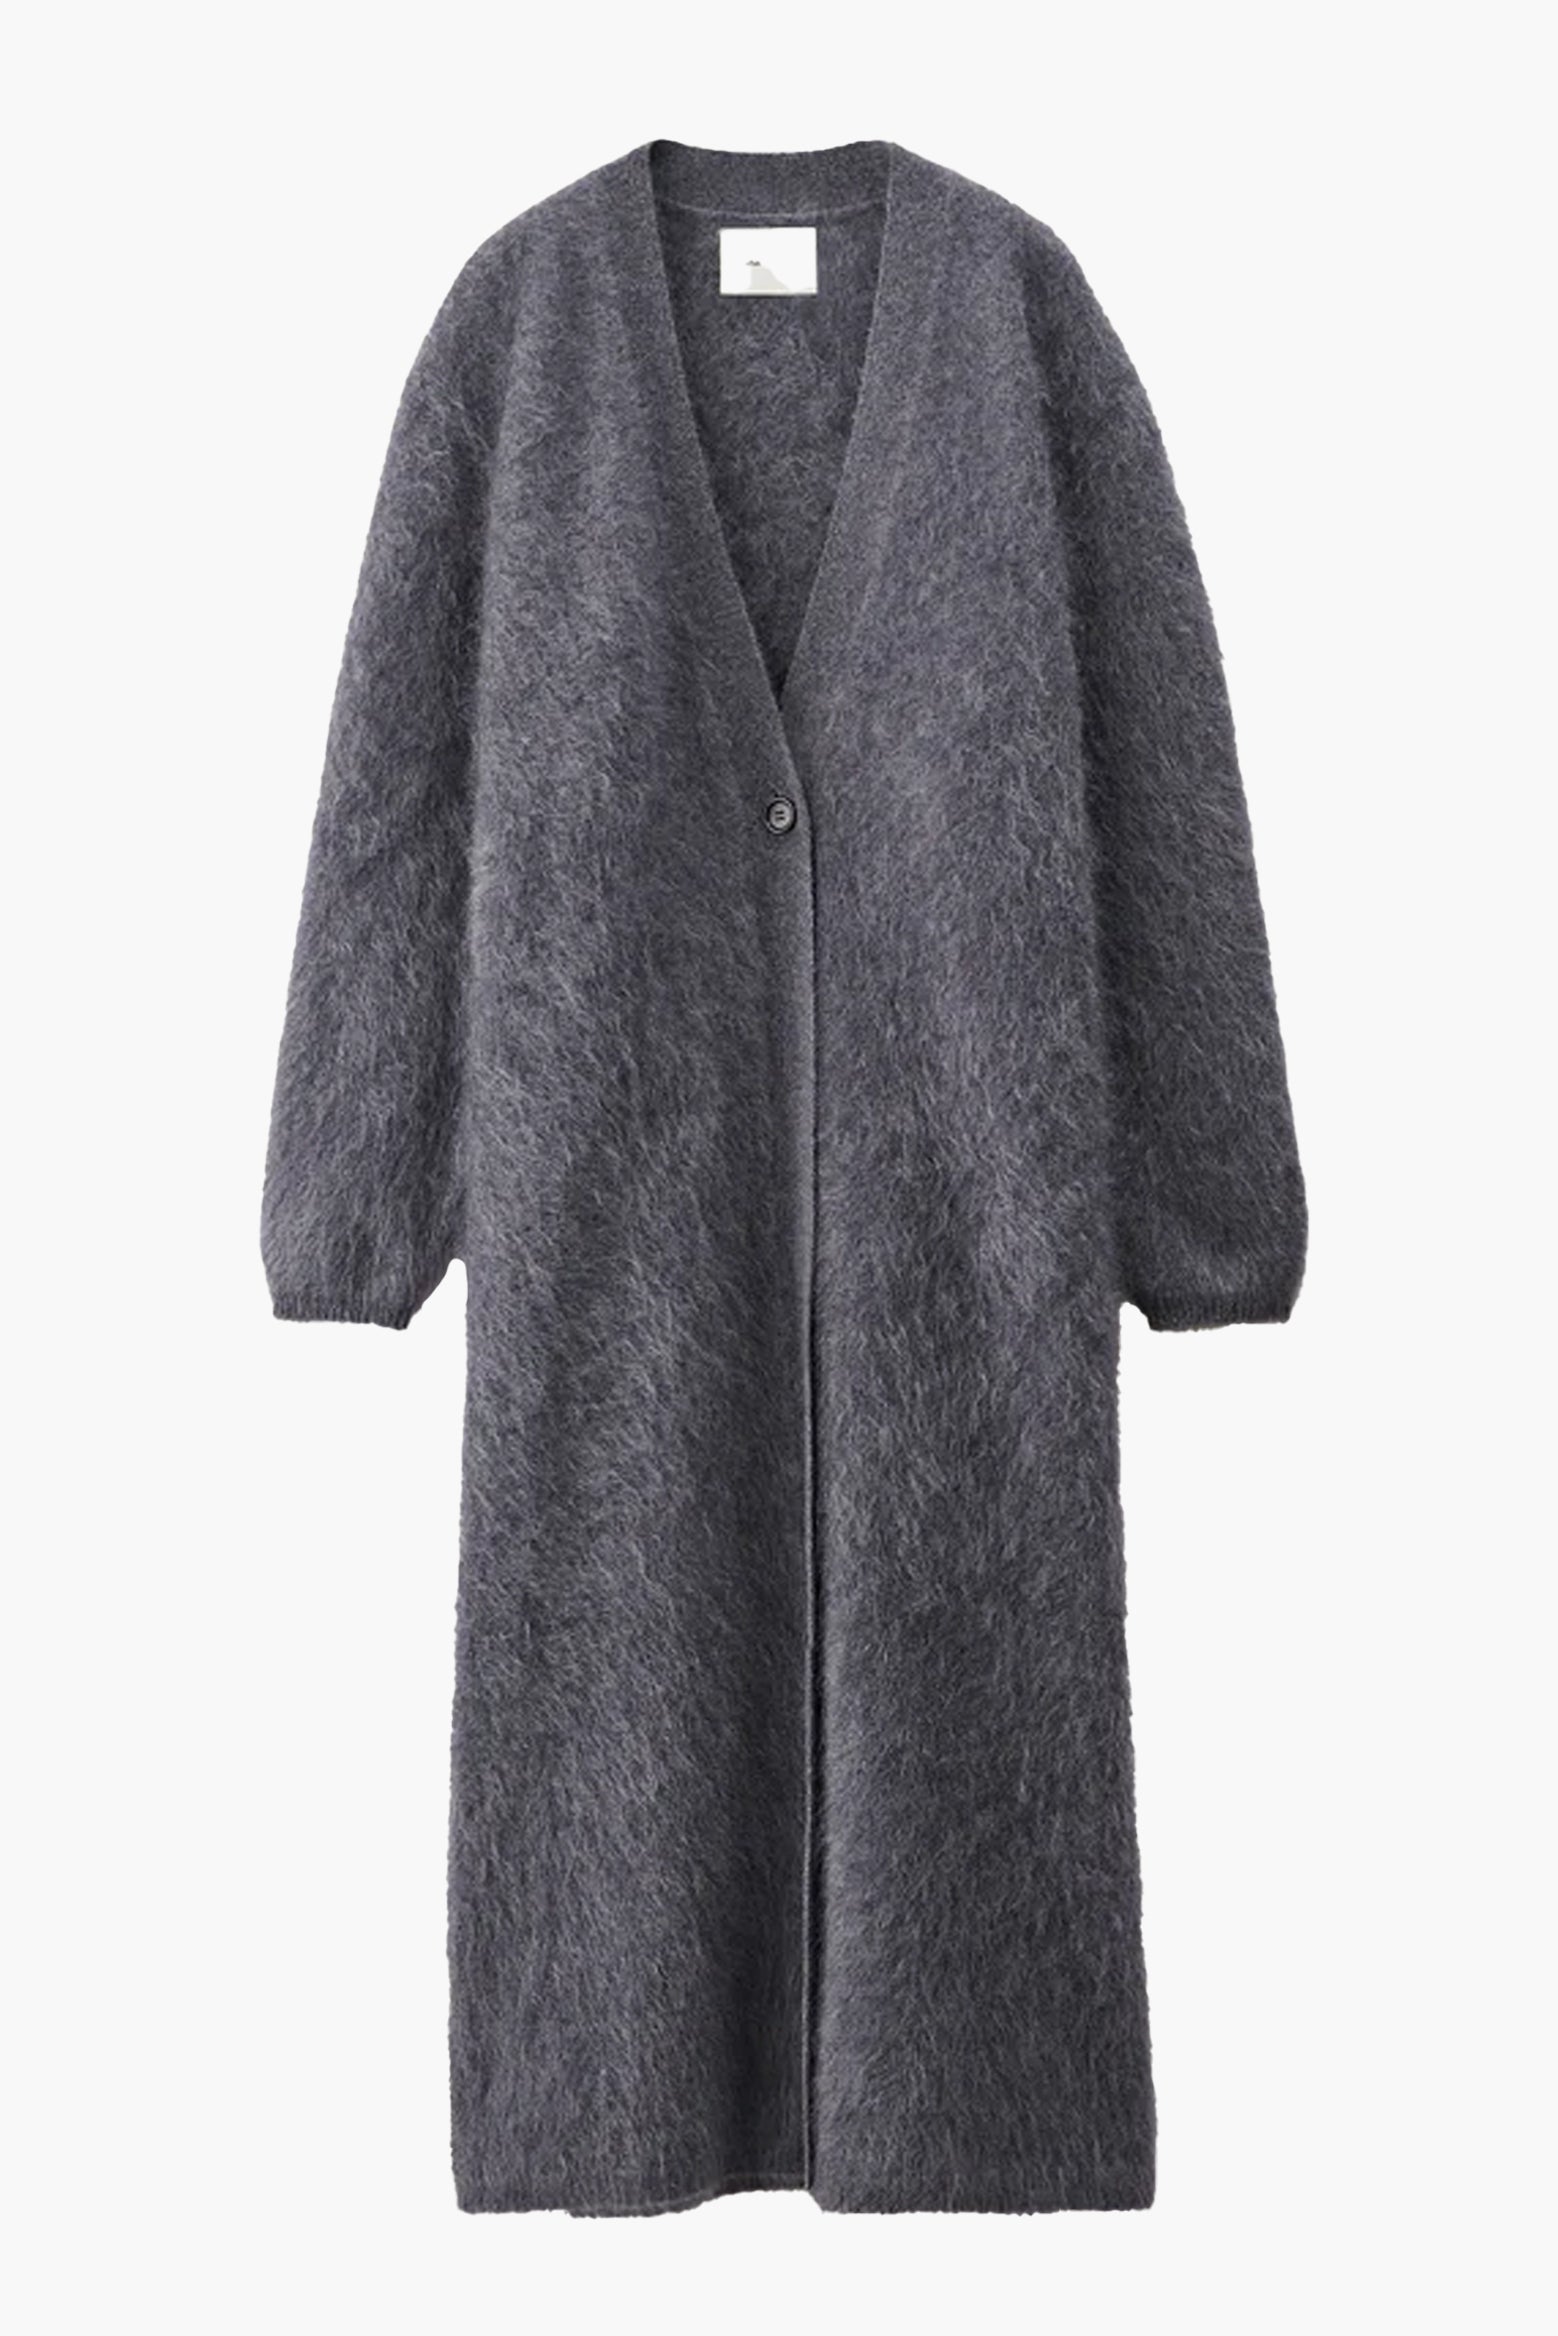 Lisa Yang Agda Cardigan Coat in Graphite available at The New Trend Australia. 